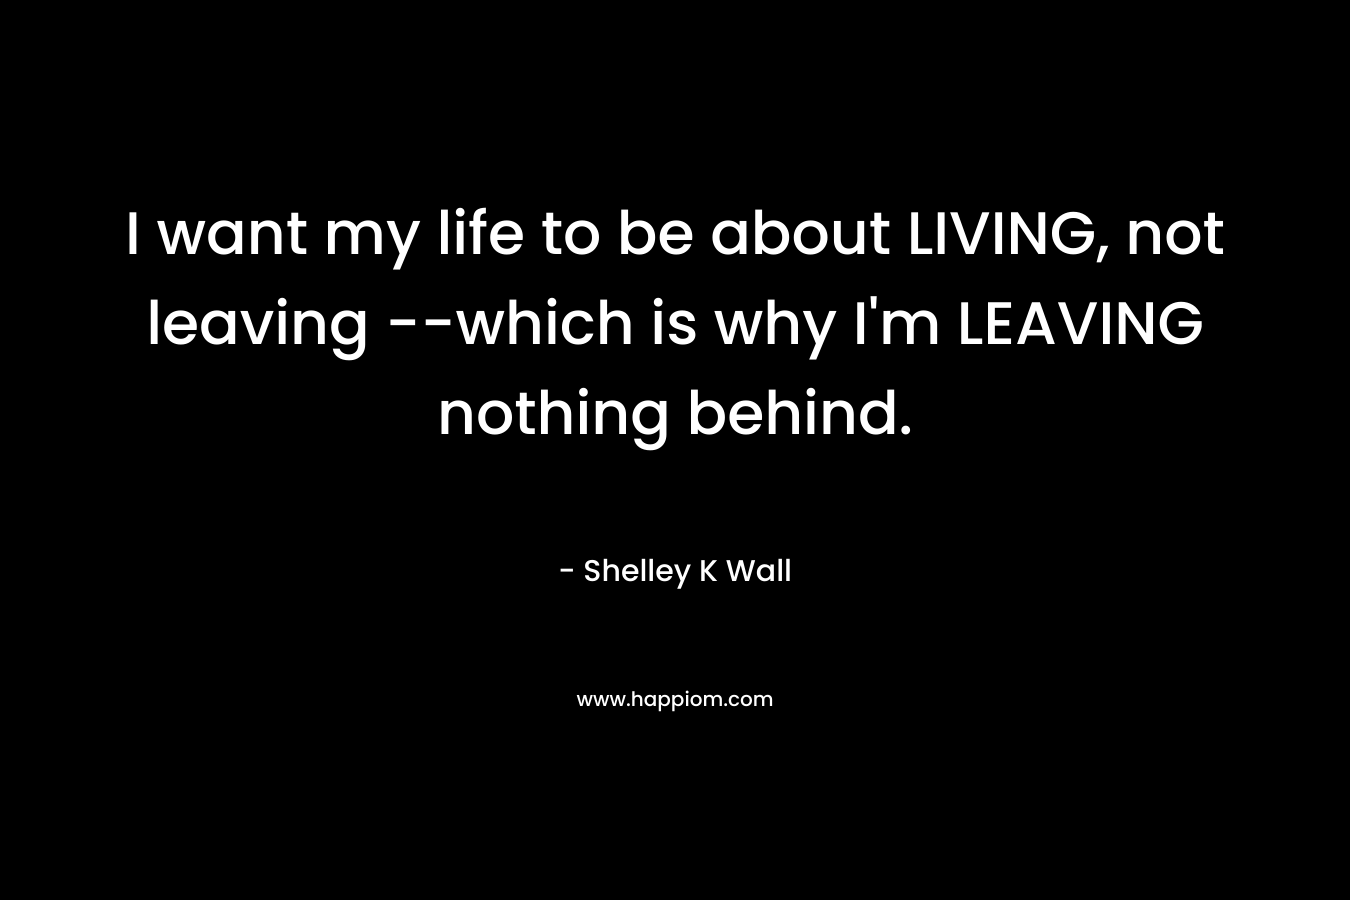 I want my life to be about LIVING, not leaving --which is why I'm LEAVING nothing behind.